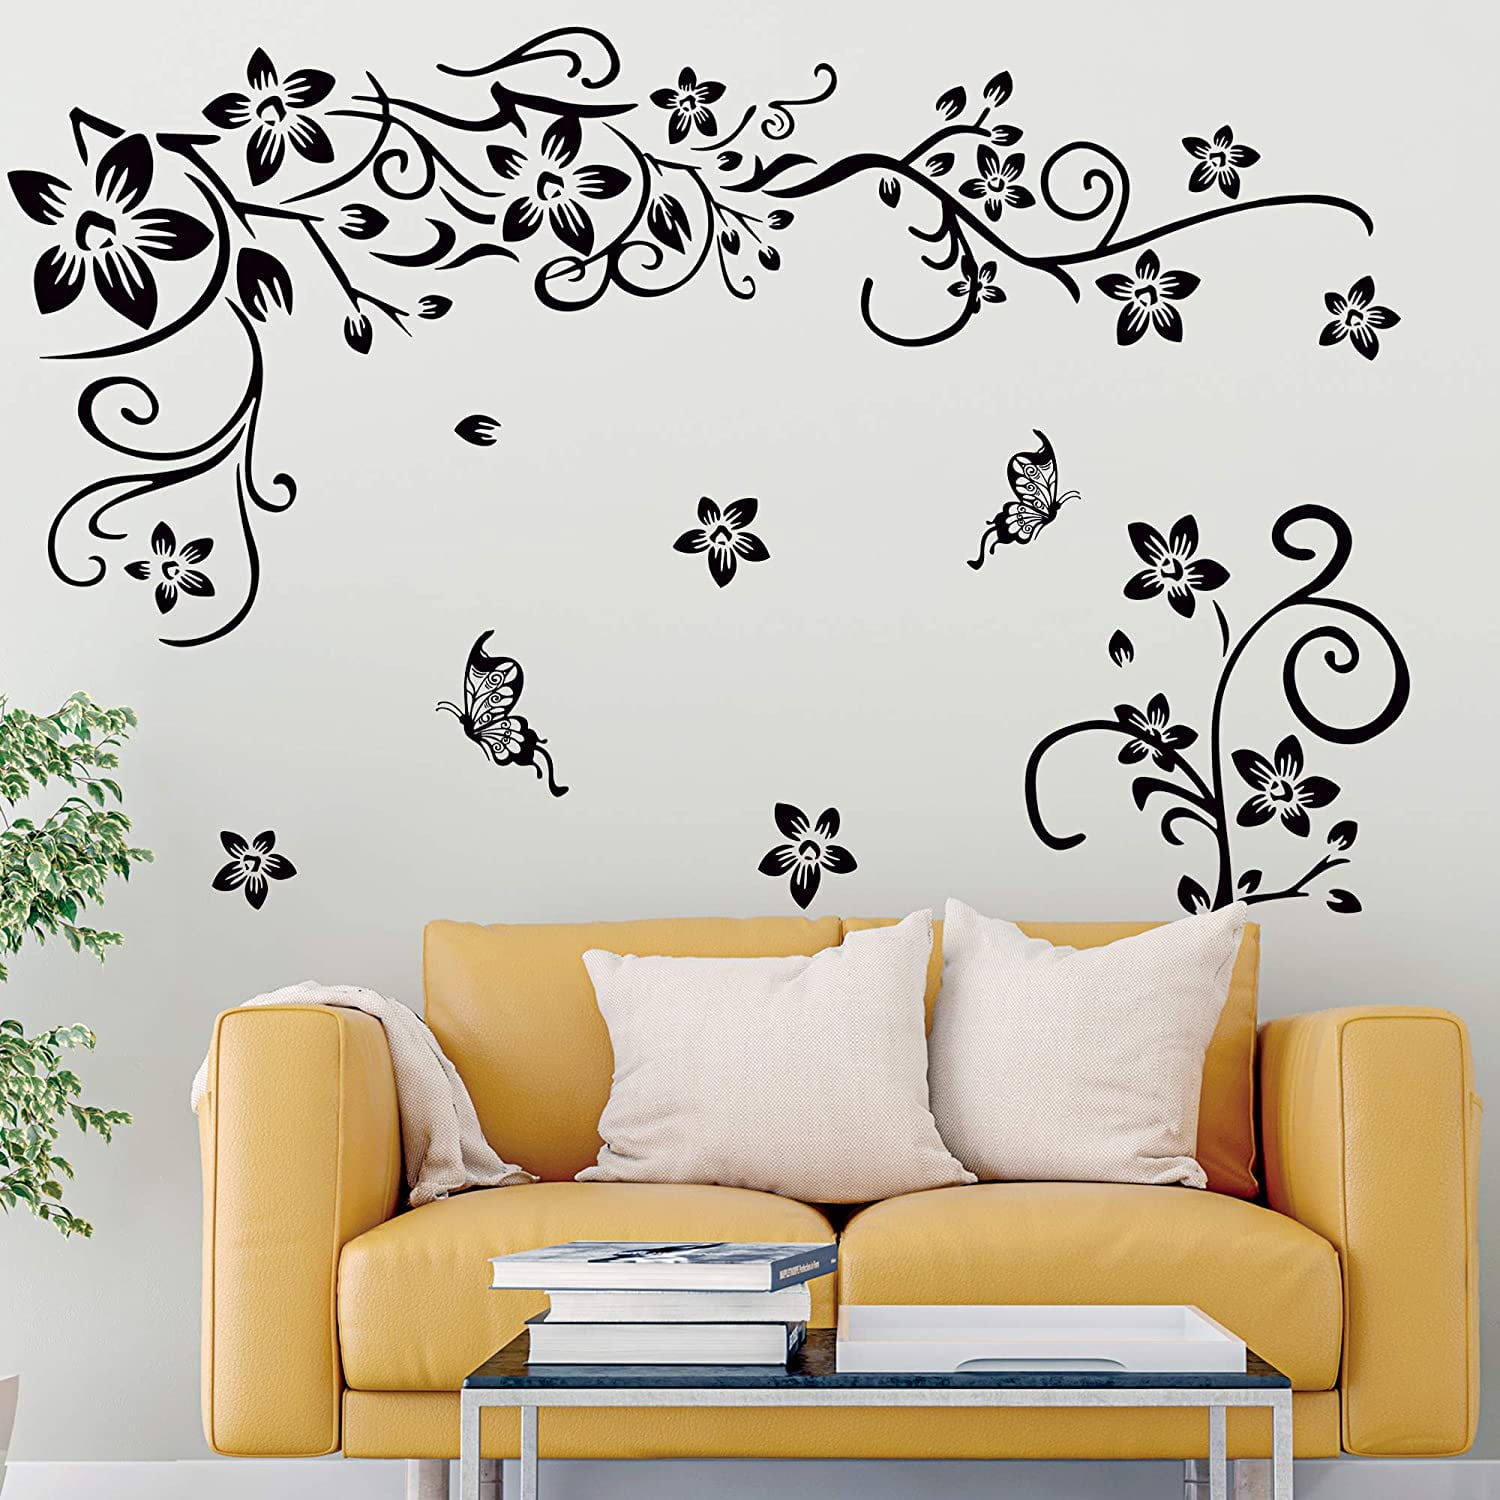 Removable Black Flower Vines Wall Decal Butterfly Wall Stickers